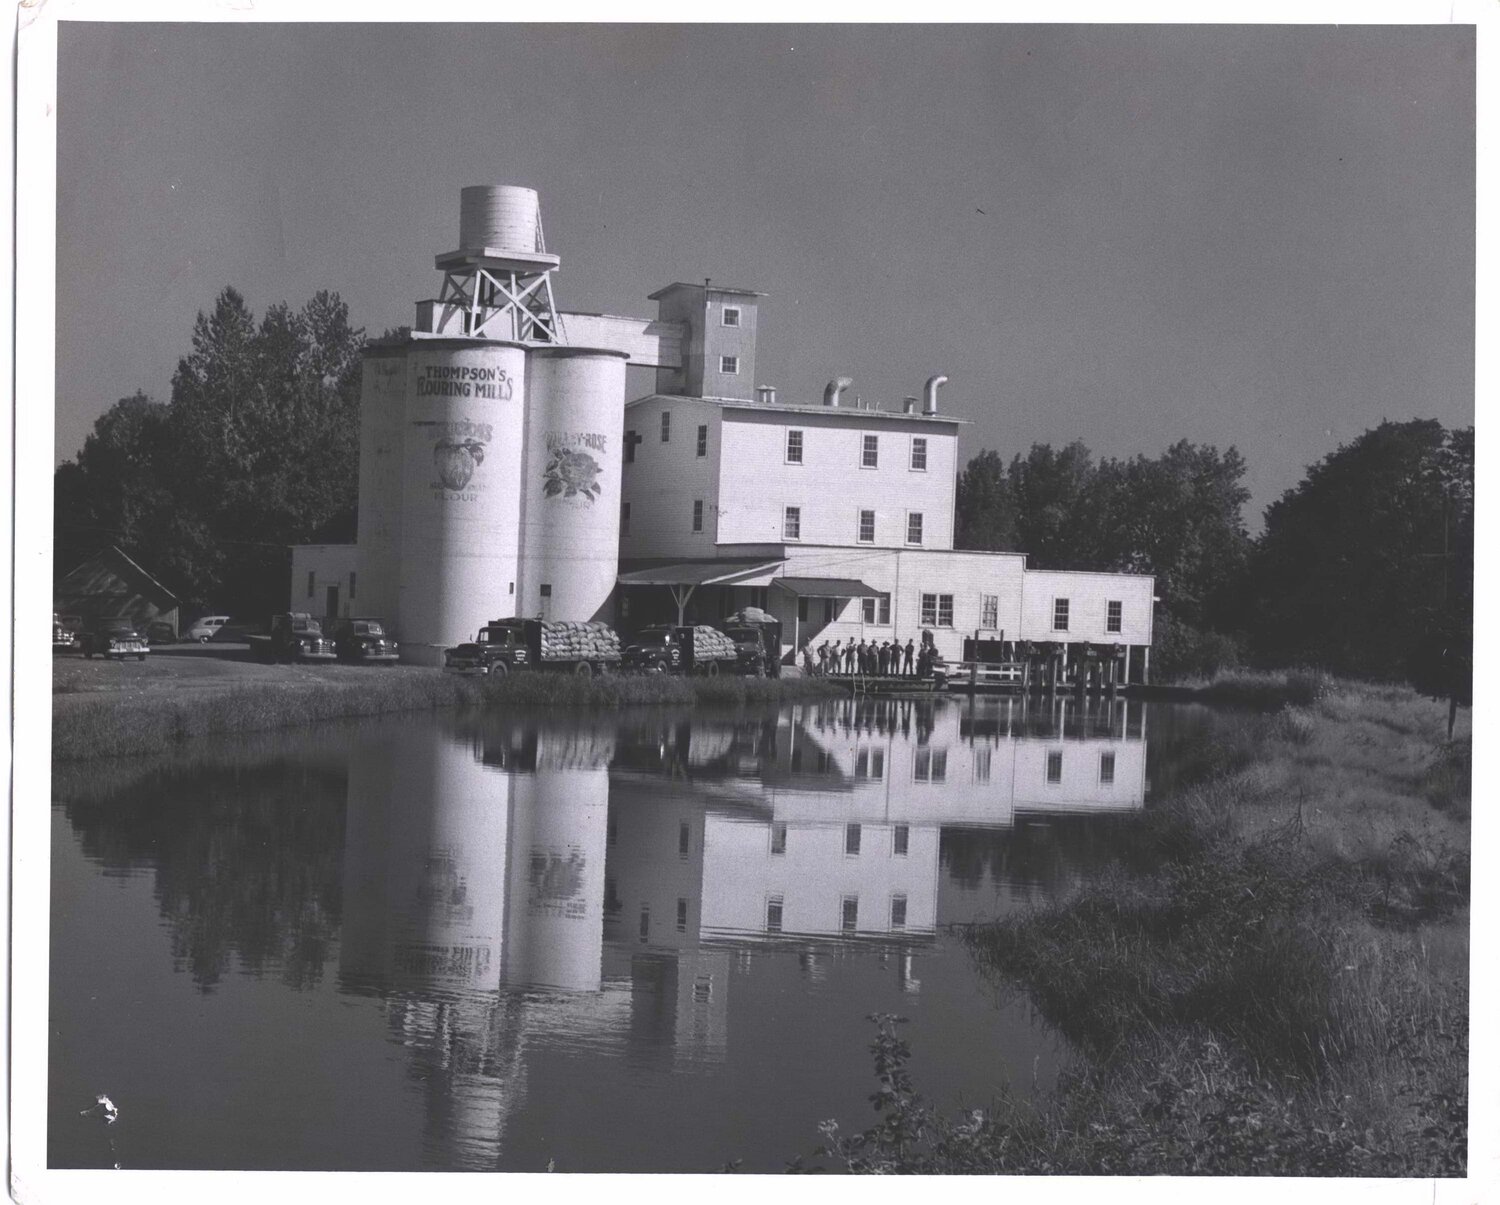 In 1939, a line of trucks filled with flour sacks wait in front of the mill.  People are lined up at the mill's entrance.  The mill is beautifully reflected in the mill pond.